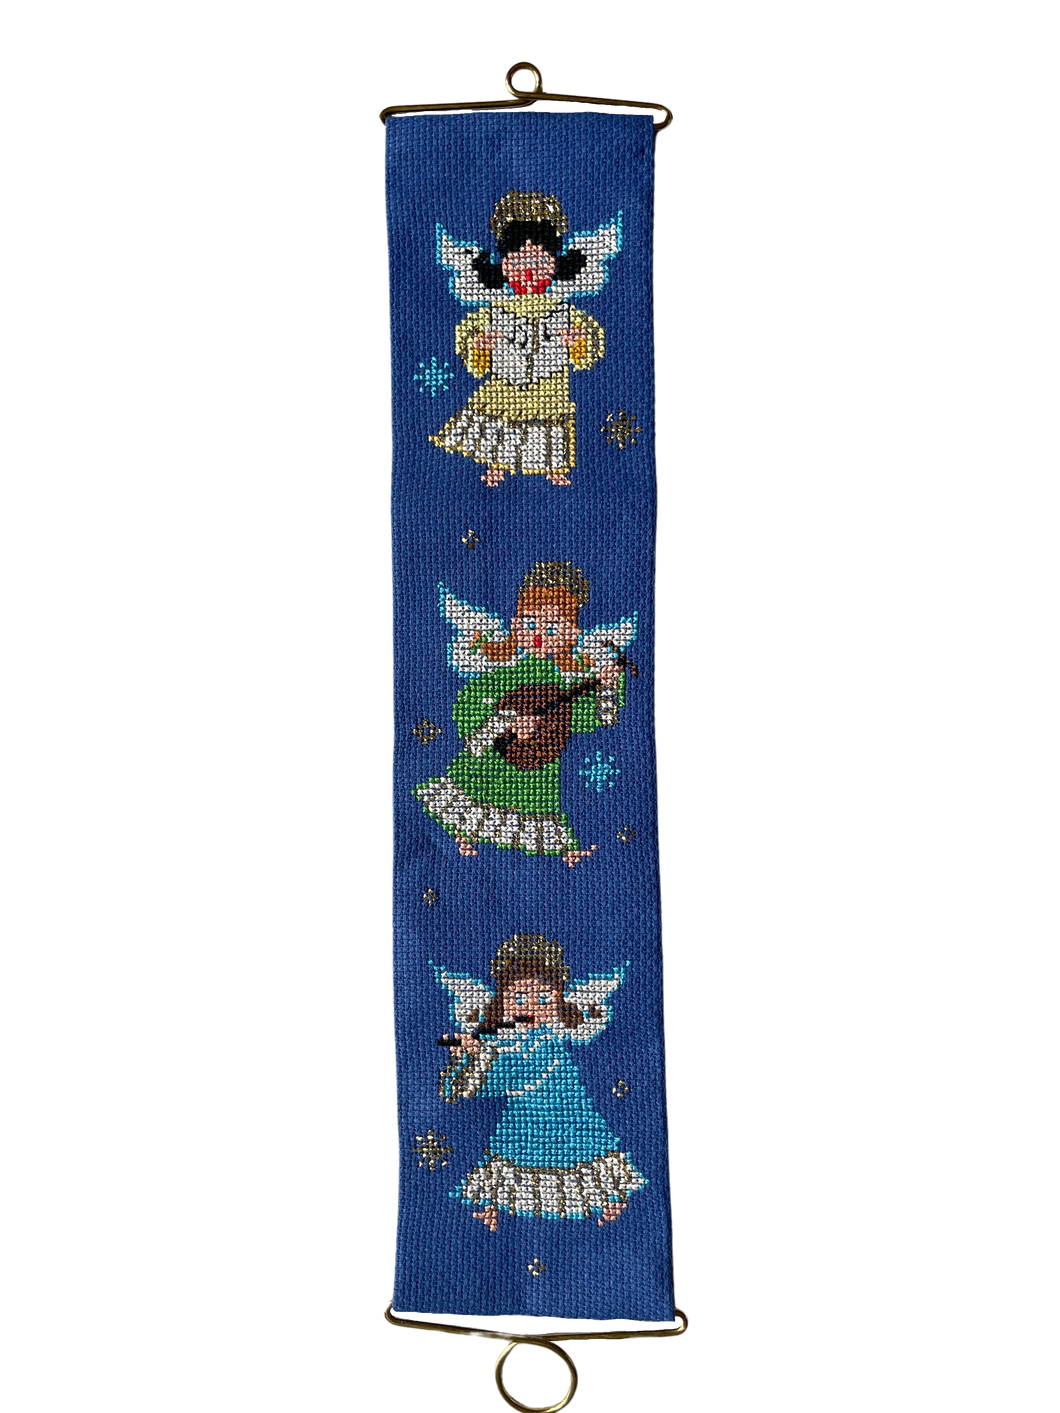 Vintage 1960s Danish handmade embroidered Christmas wall hanging featuring three angles in green, yellow, pink and blue on a blue background - Moppet